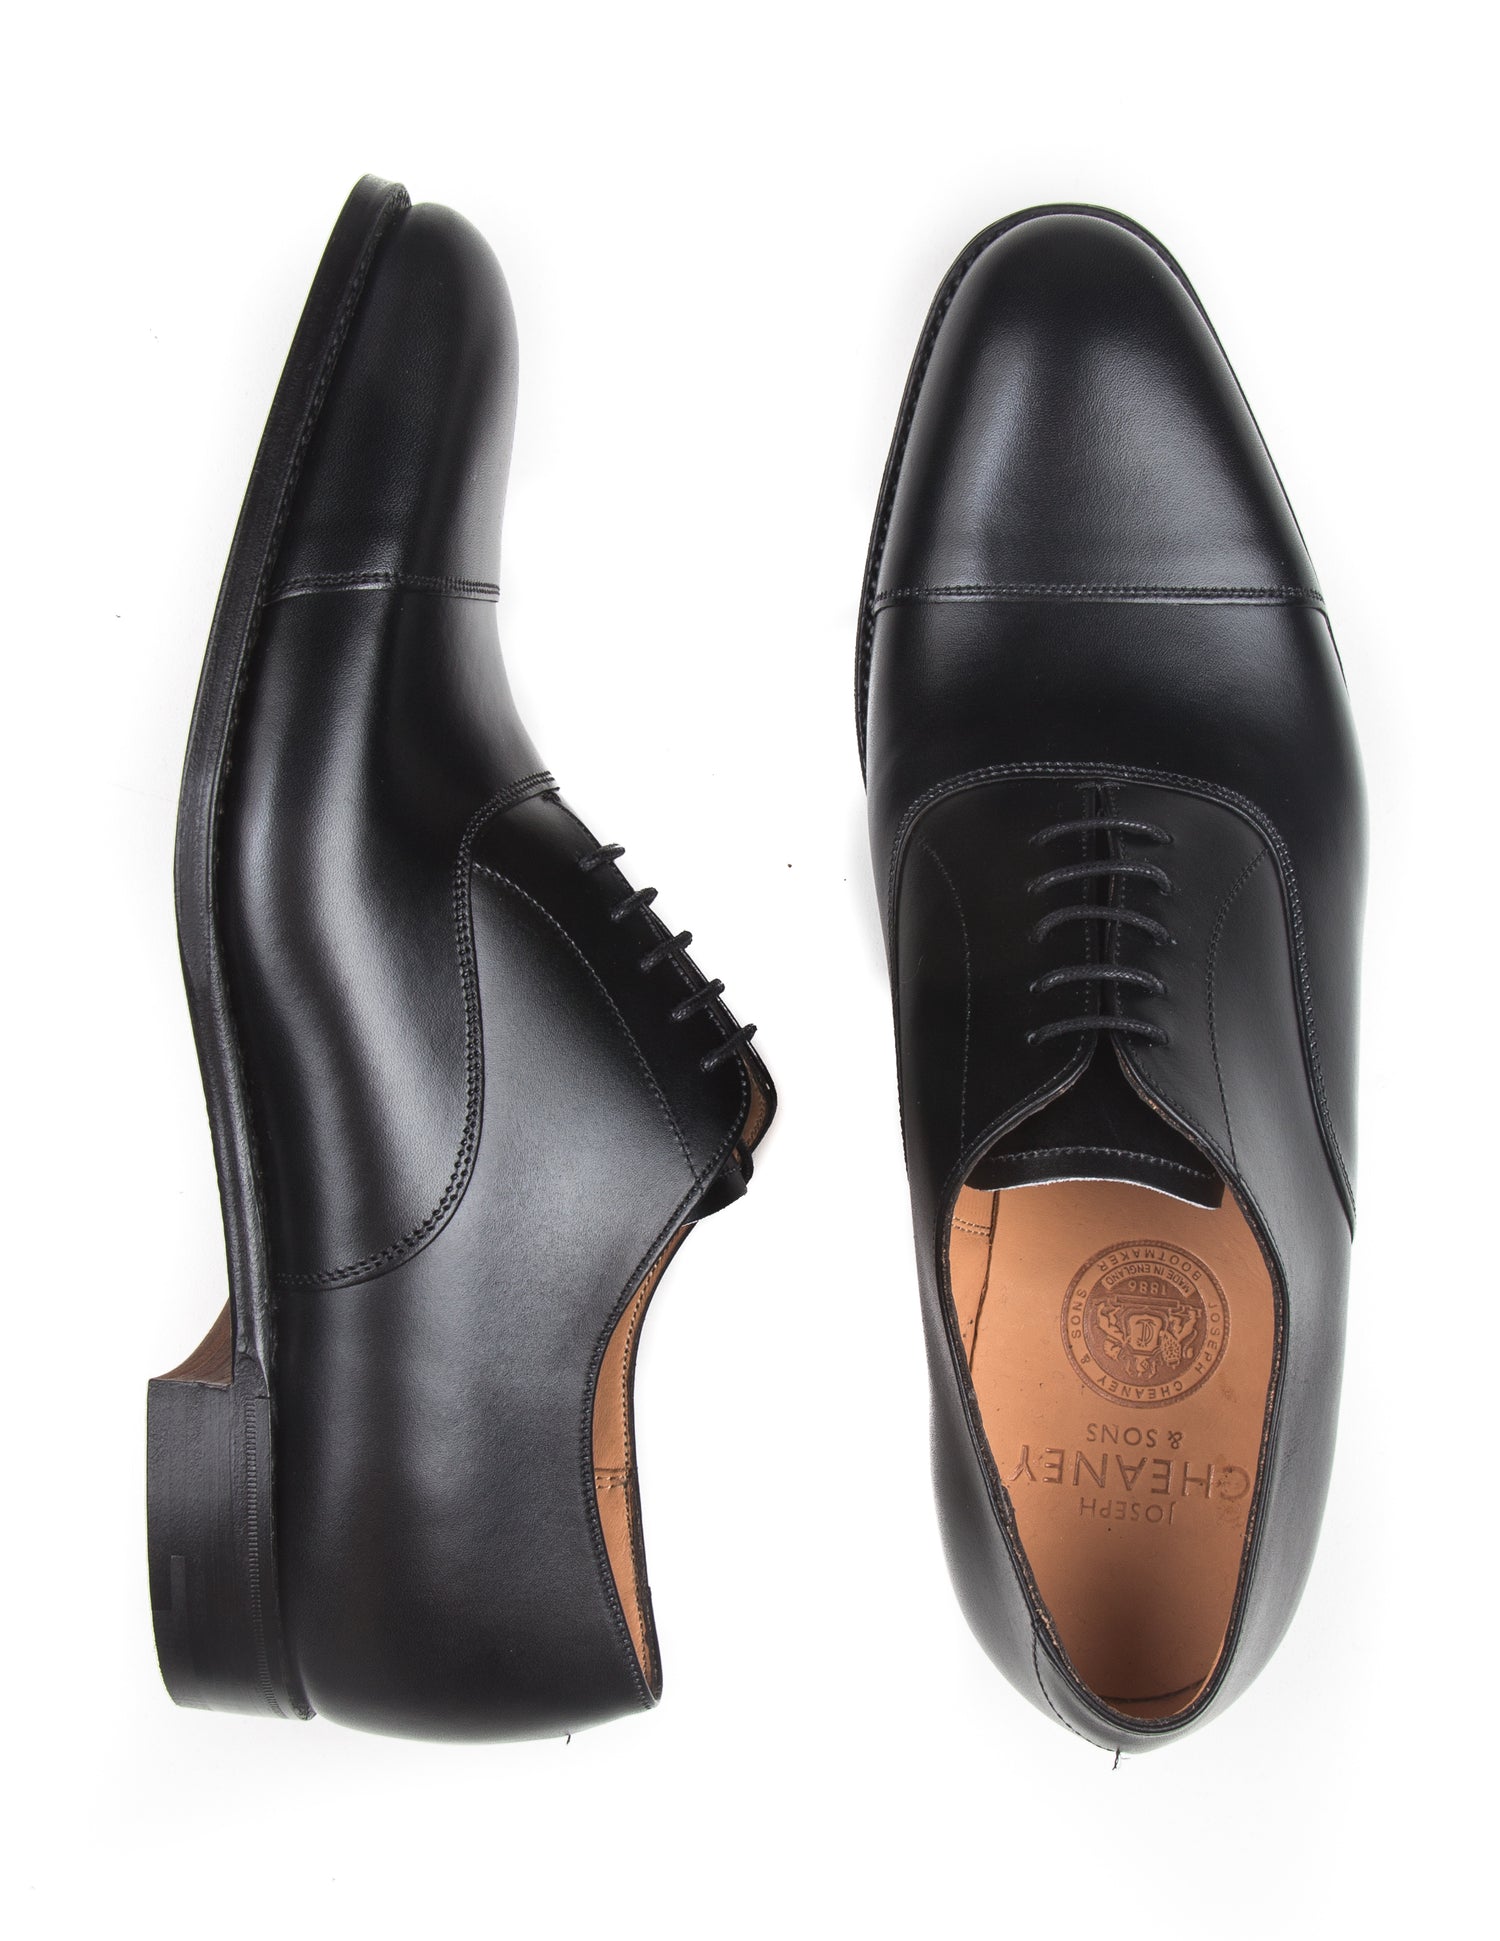 Flat shot of Joseph Cheaney Lime Oxford Shoes in Black Calf Leather. One shoe is on its side to show profile